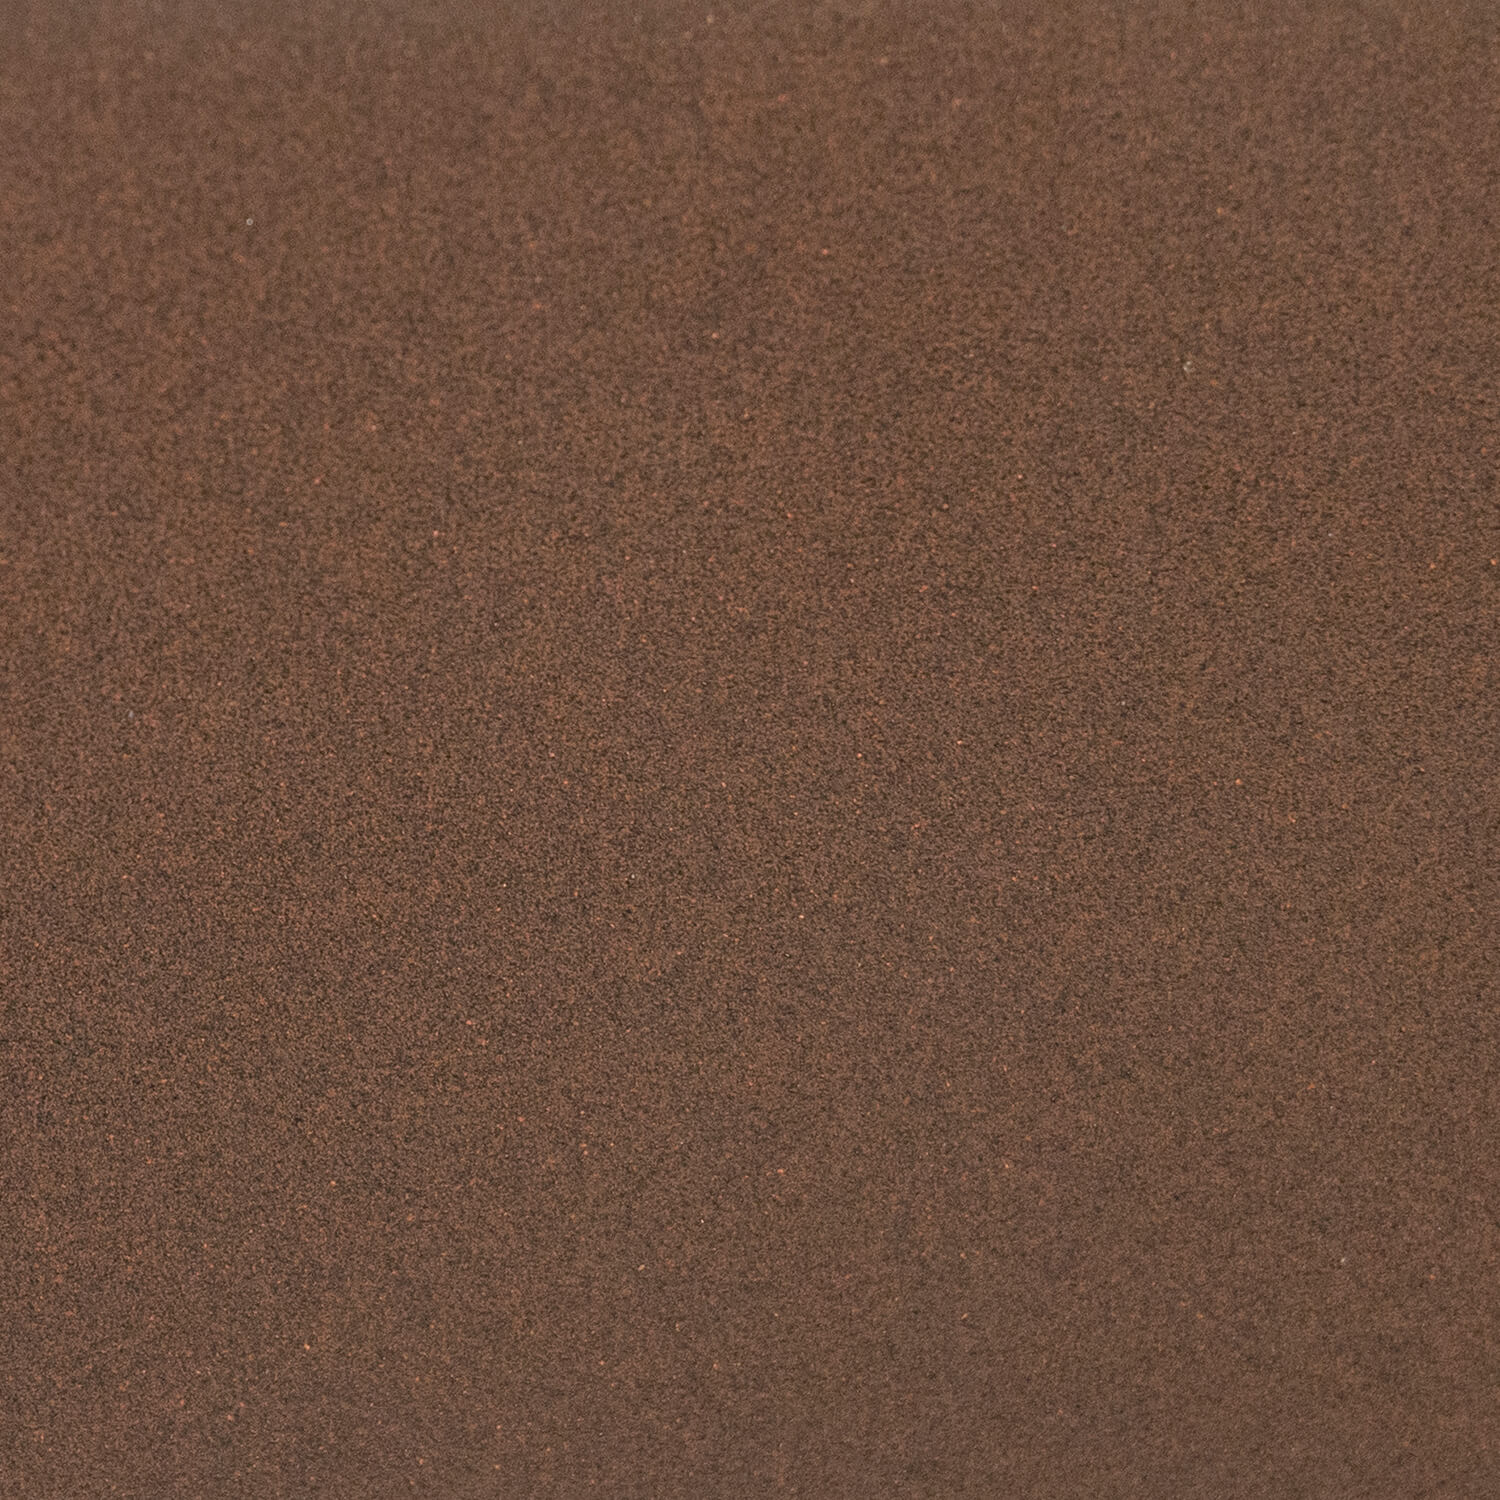 C9 Textured Rust Color Sample